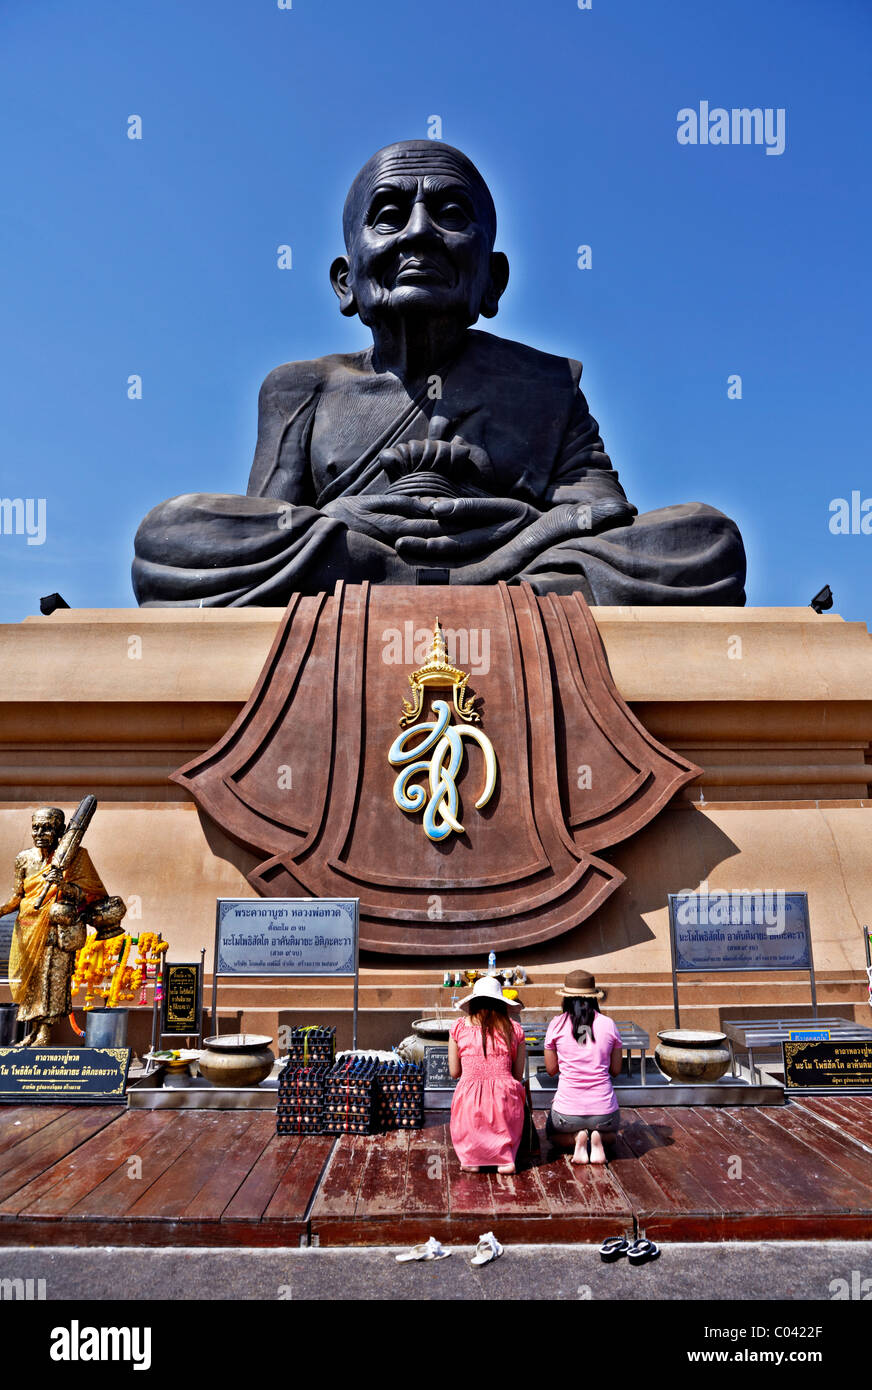 The giant statue of revered monk Luang Pu Thuat at Wat Huay Mongkol Hua Hin Thailand Asia measuring some 31.5 feet in height. Stock Photo